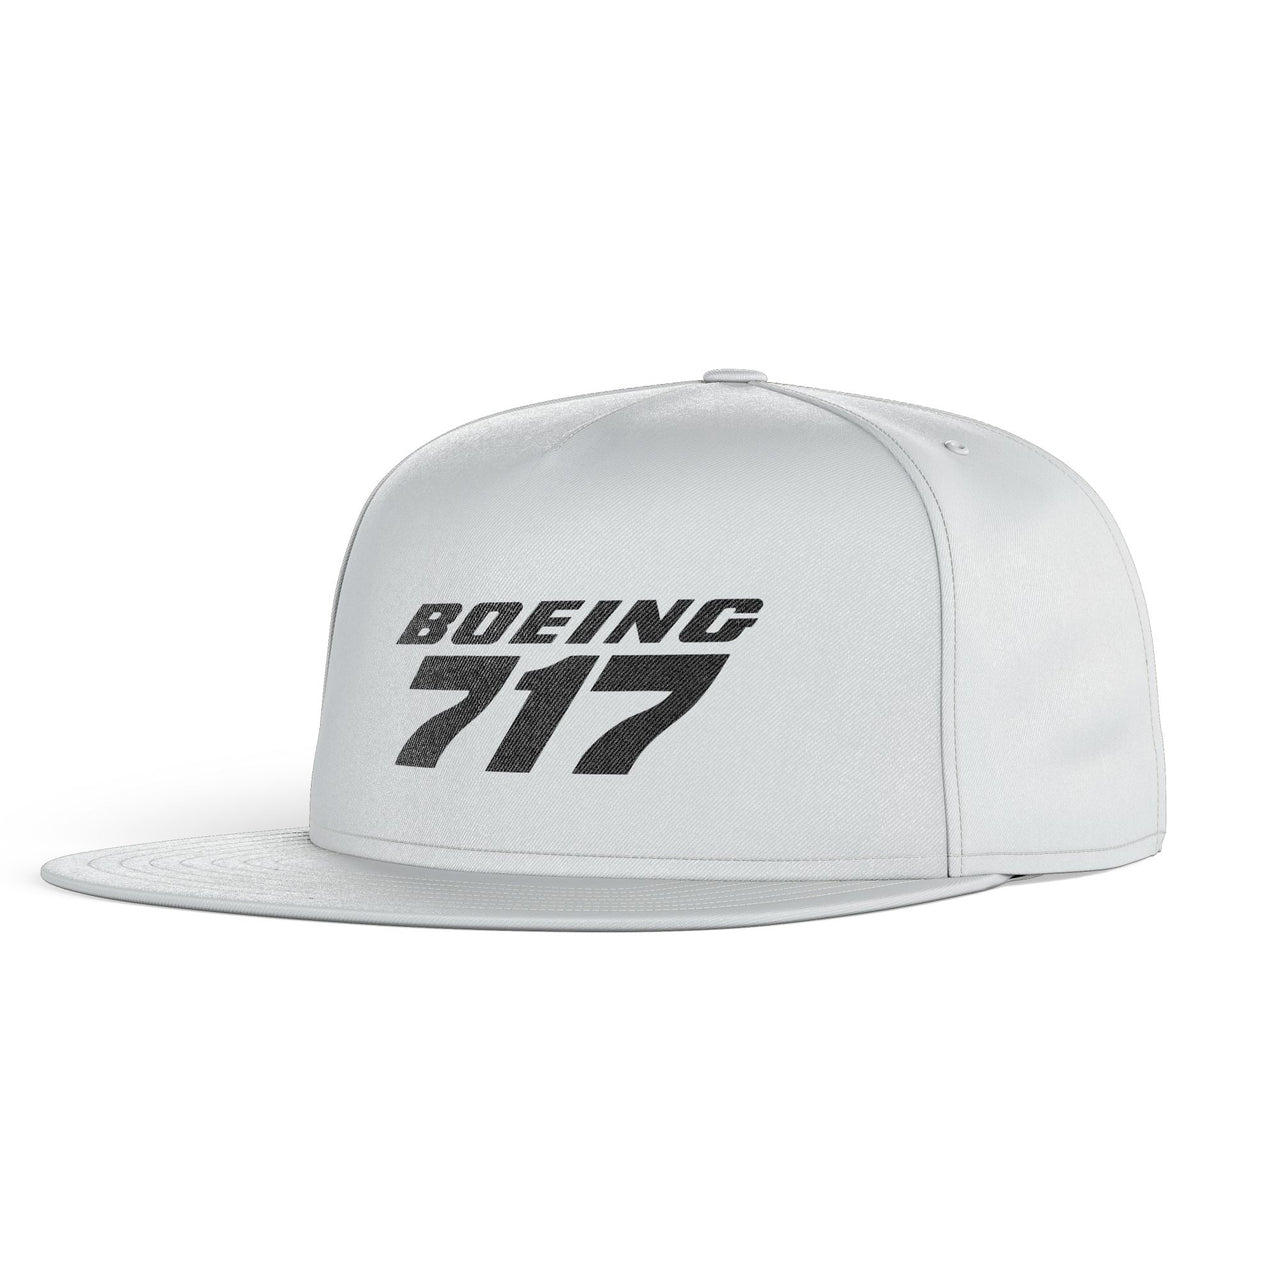 Boeing 717 & Text Designed Snapback Caps & Hats